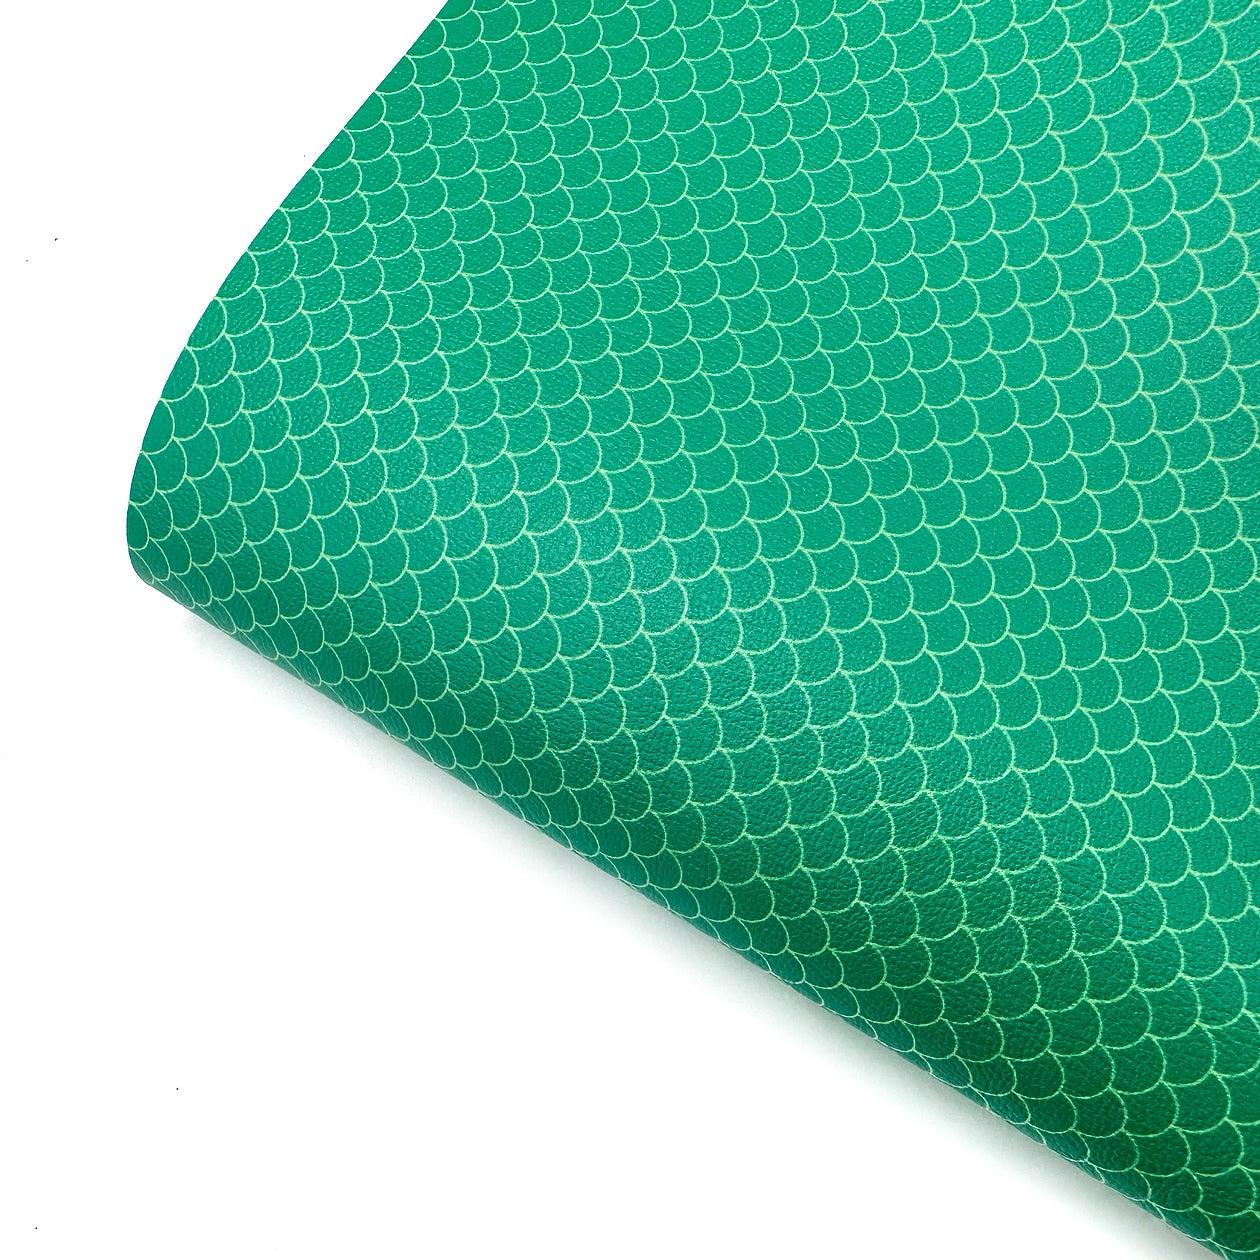 Green Mermaid Scales Premium Faux Leather Fabric Sheets